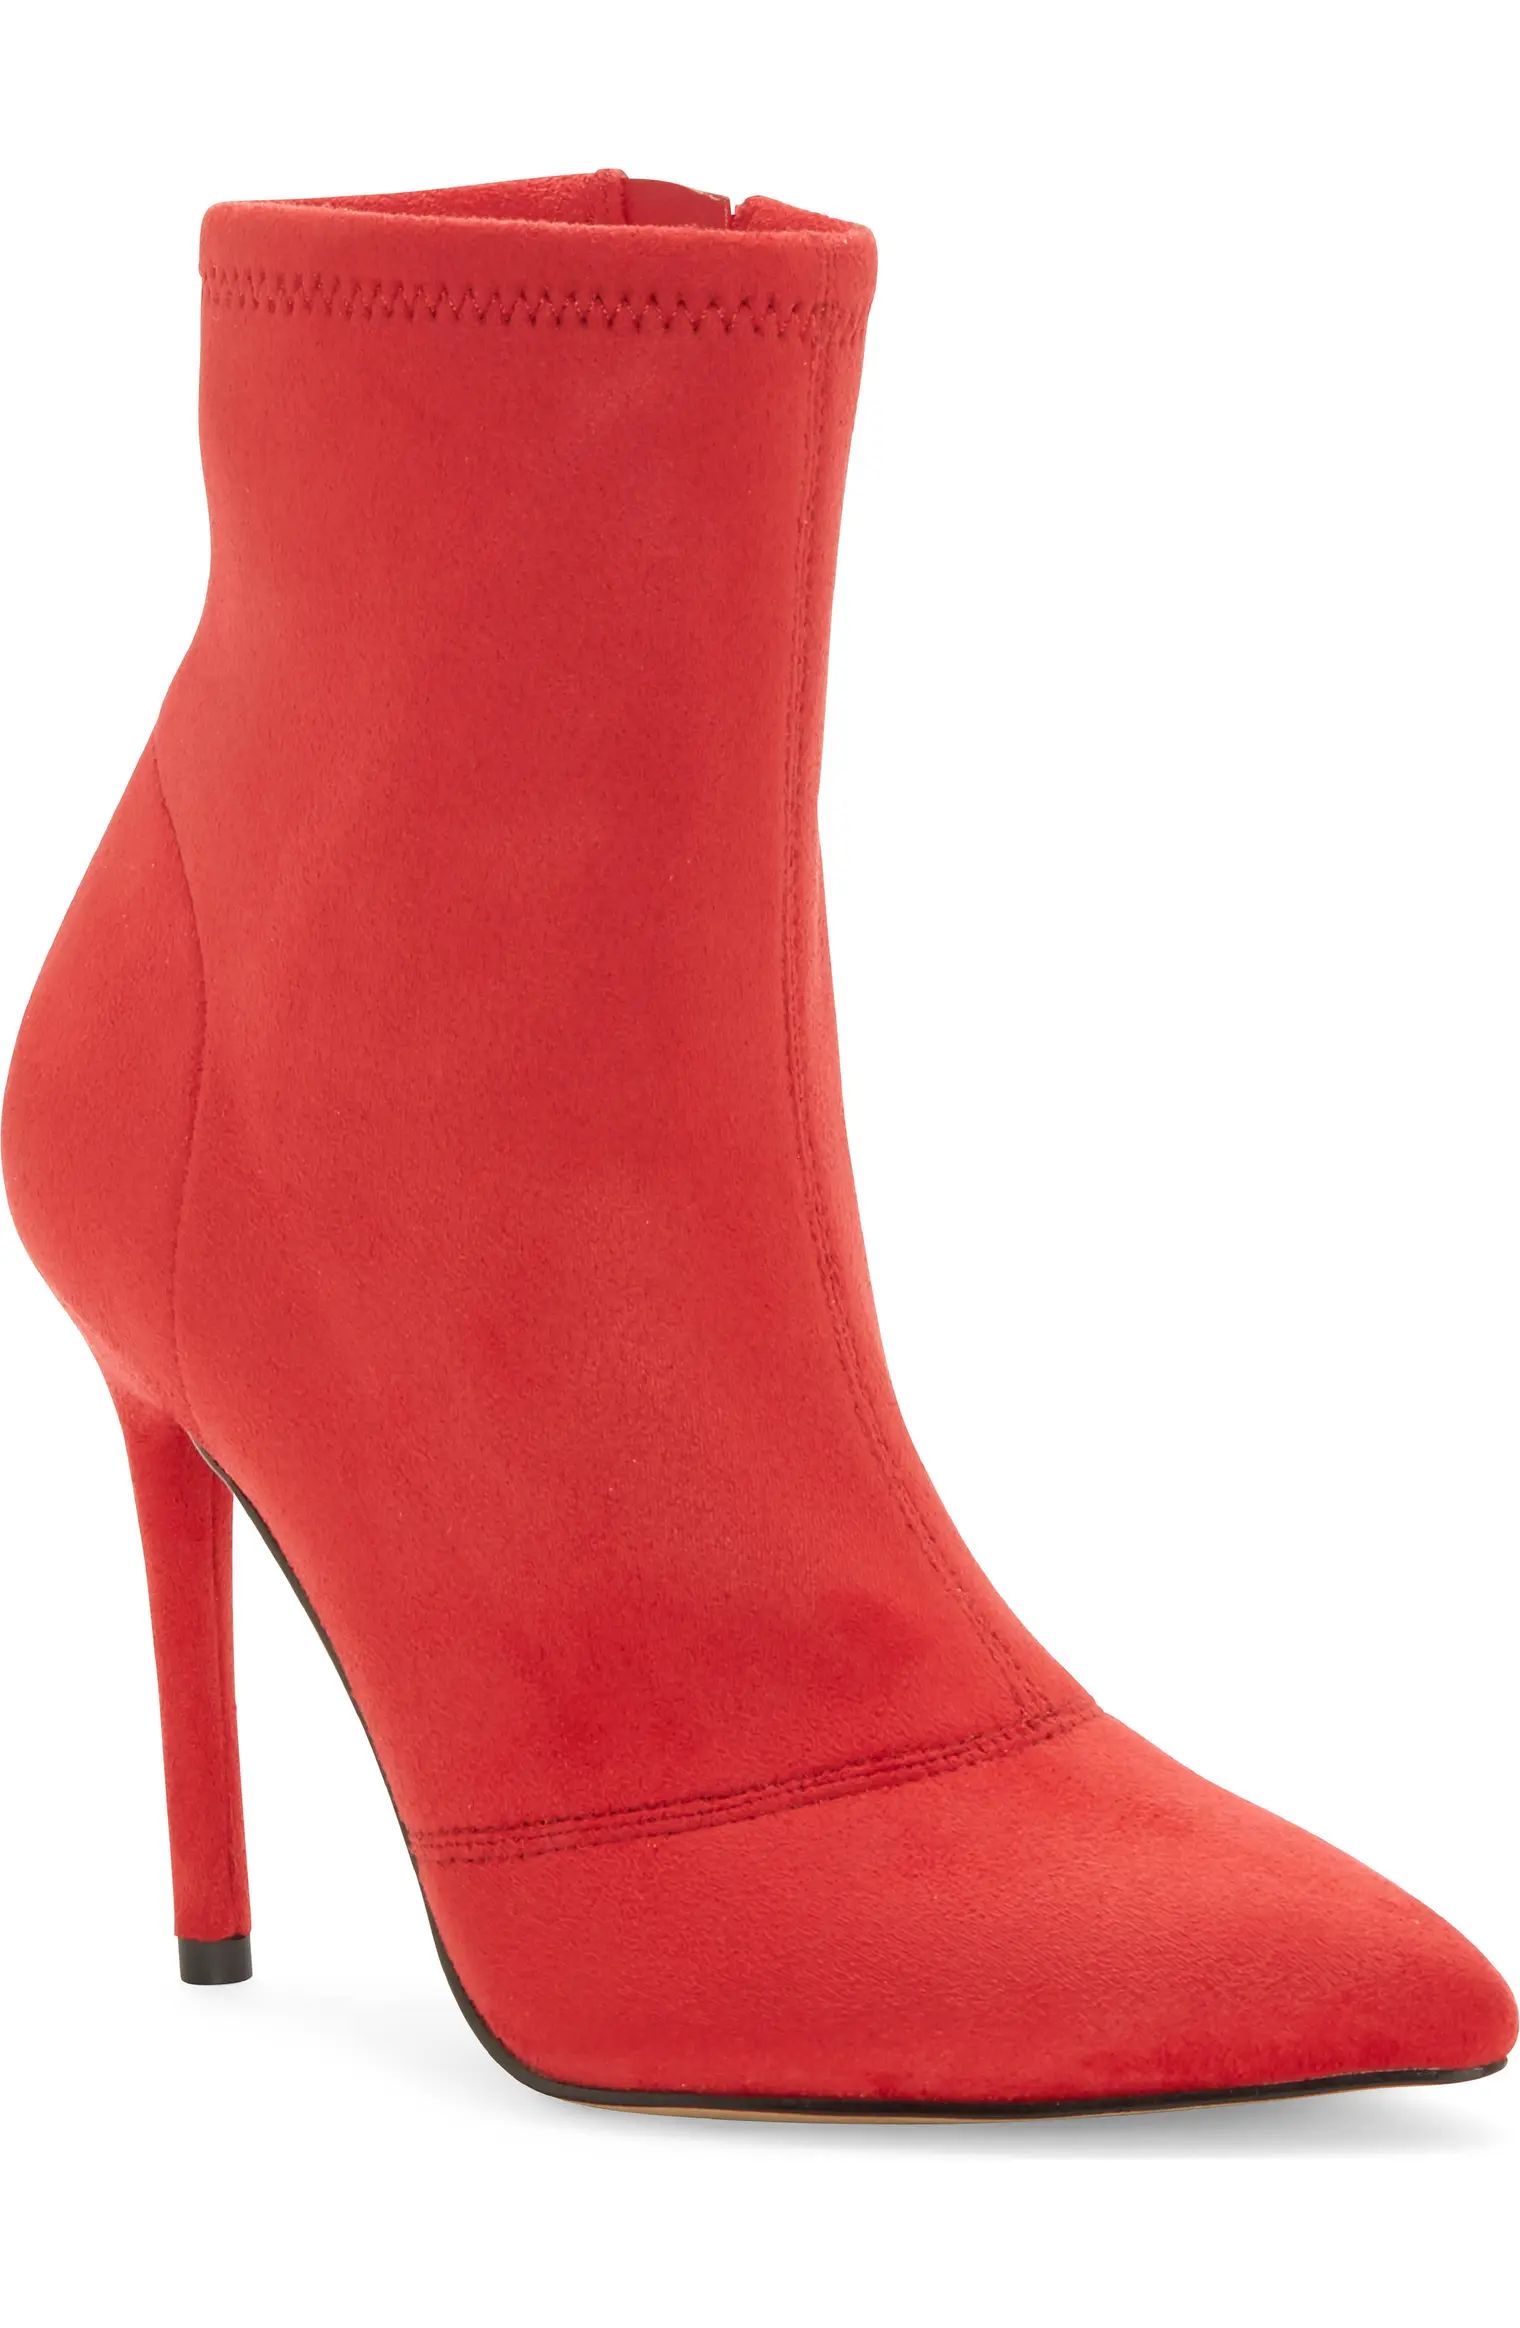 Lailra Pointed Toe Stiletto Boot | Nordstrom